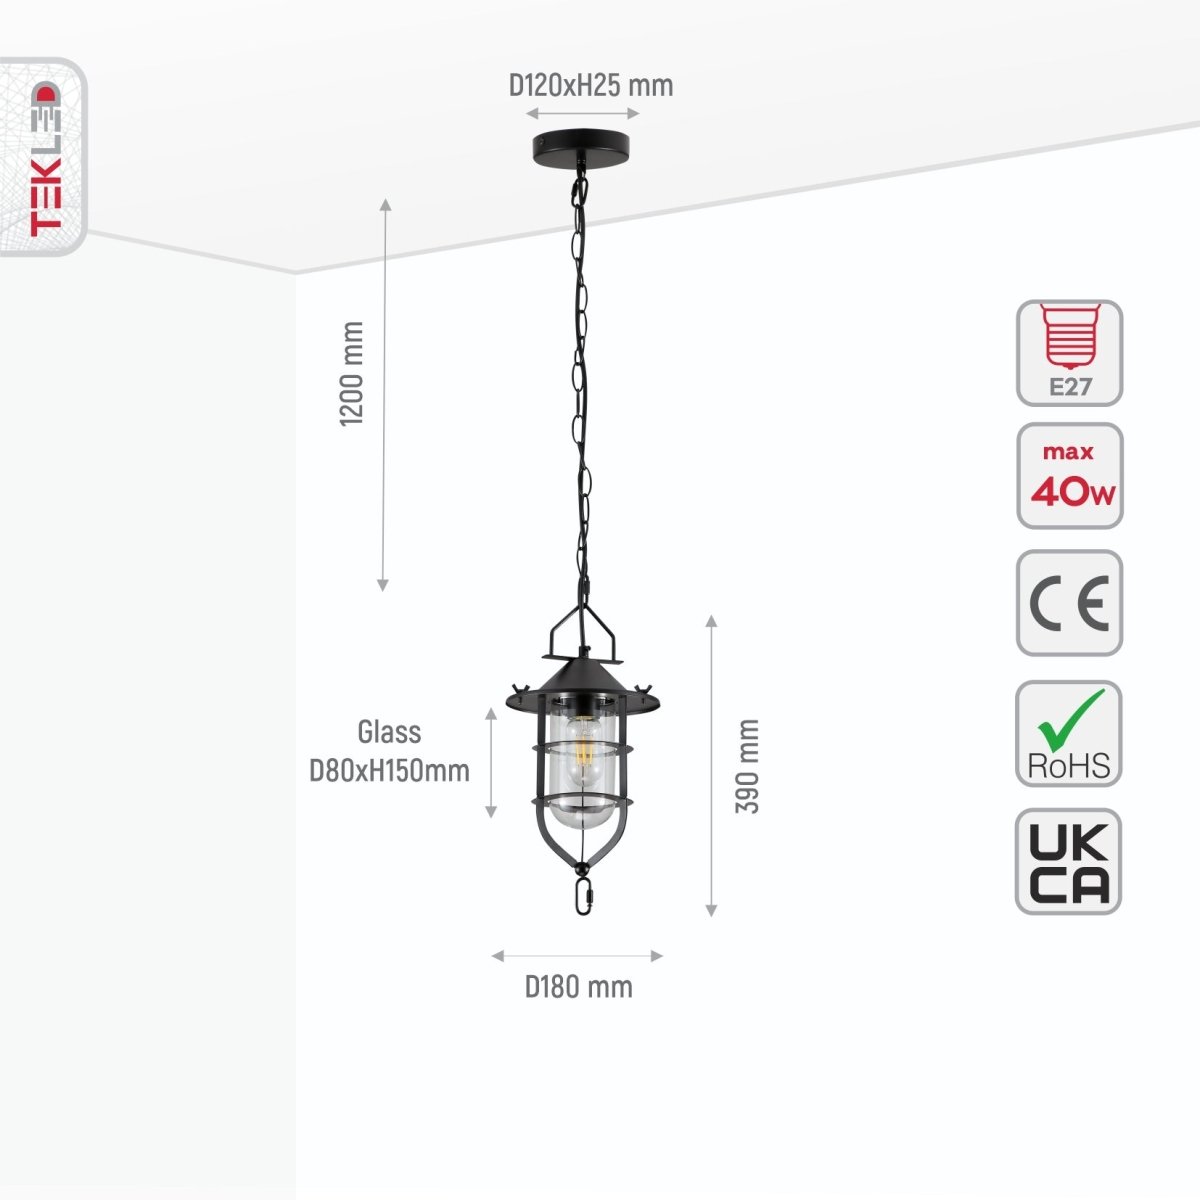 Size and specs of Black Nautical Industrial Caged Flat Shade Small Glass Metal Ceiling Pendant Light with E27 Fitting  | TEKLED 150-18370